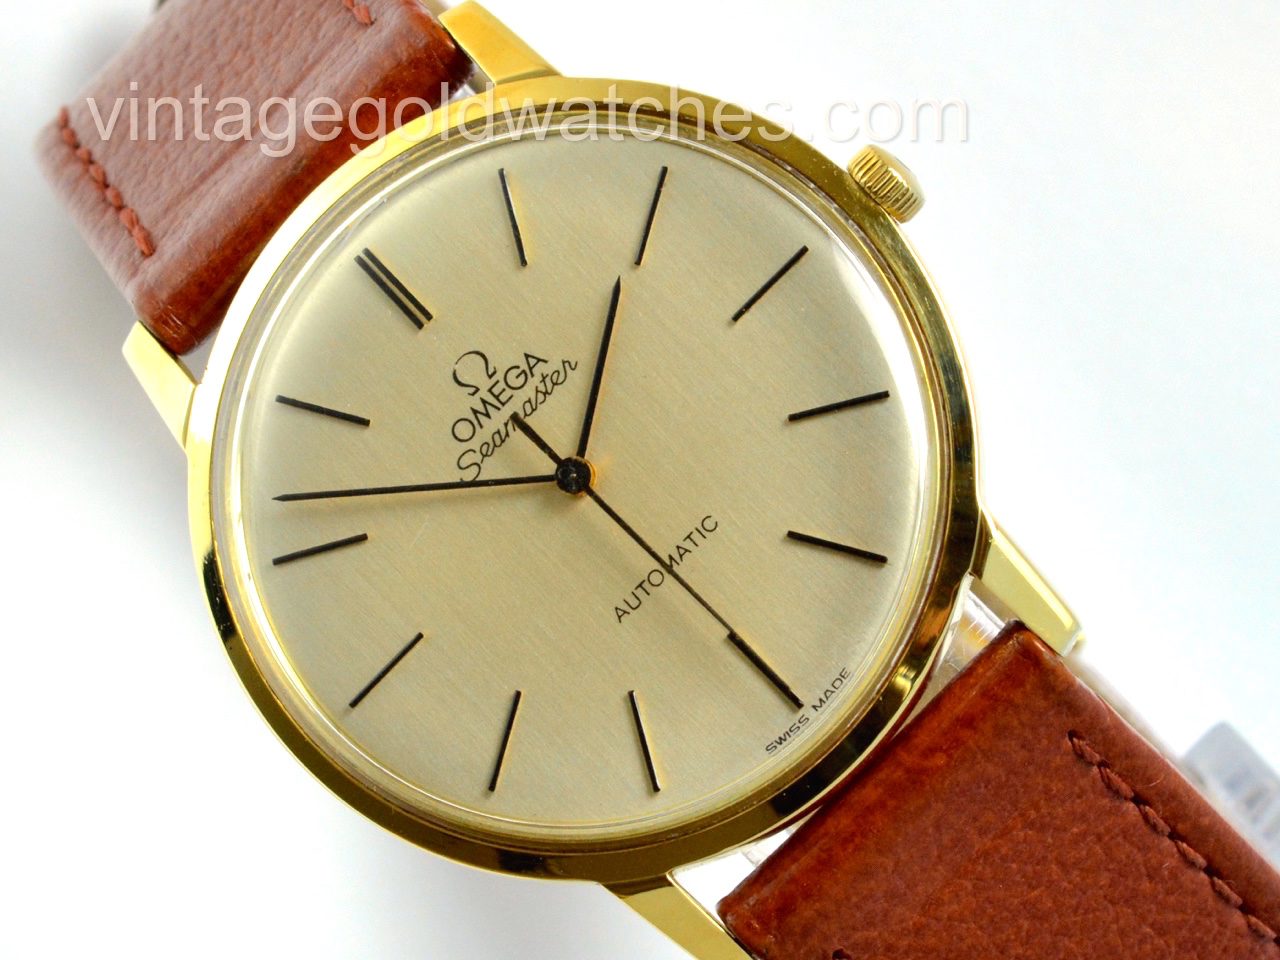 second hand omega seamaster watches